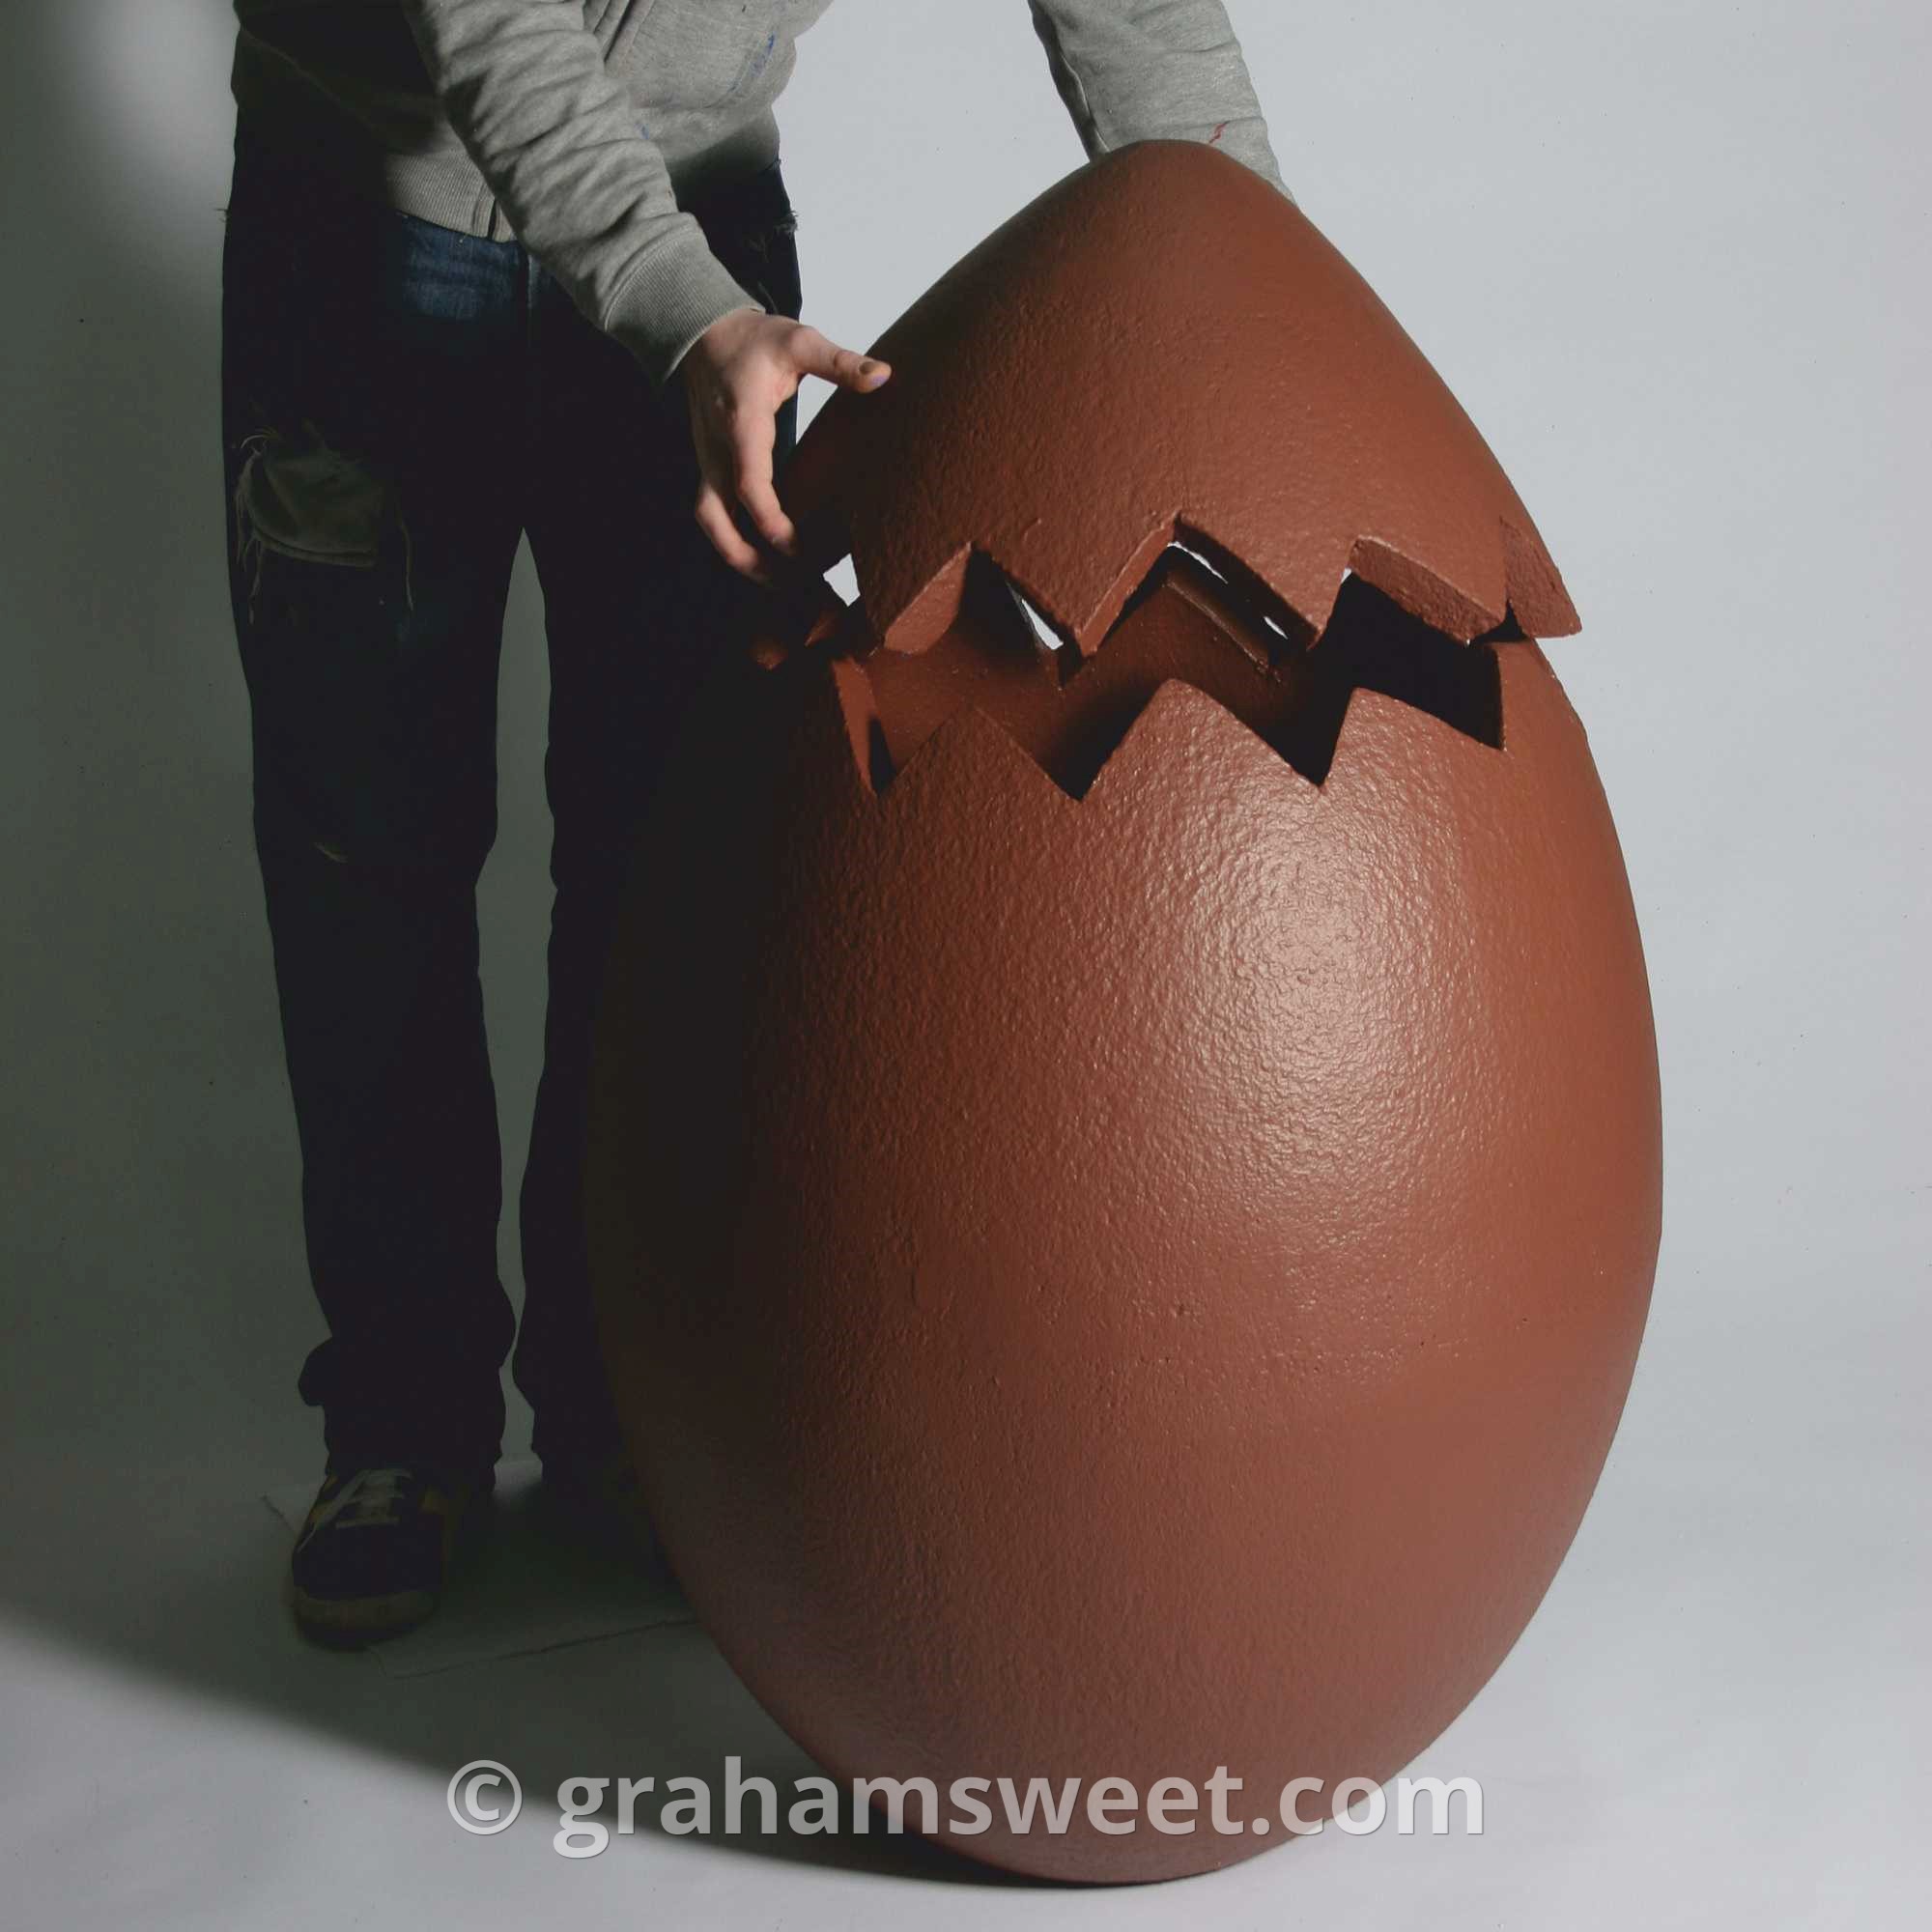 Making a Giant Egg Photo Prop  Diy photography props, Photo props